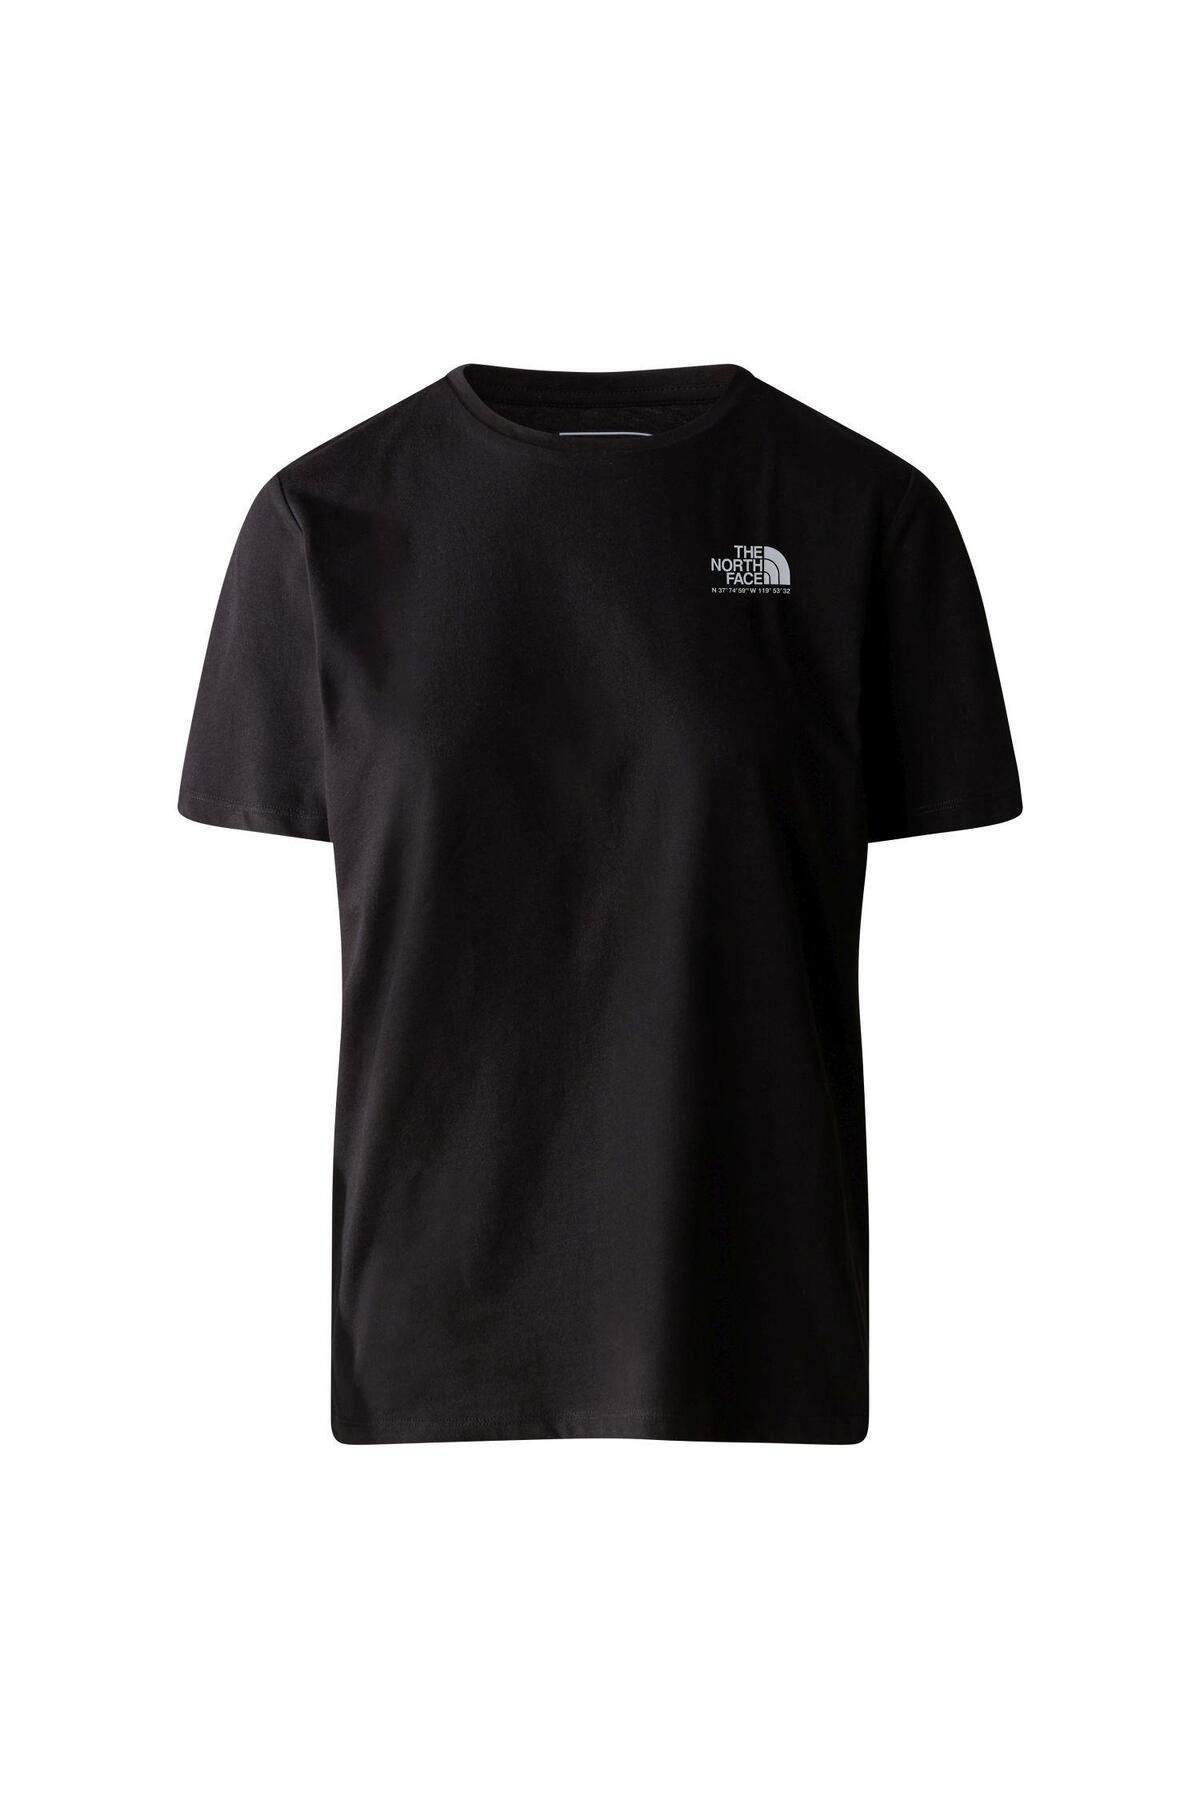 The North Face W FOUNDATION GRAPHIC TEE - EU  T-Shirt NF0A86XNKY41 Siyah-S